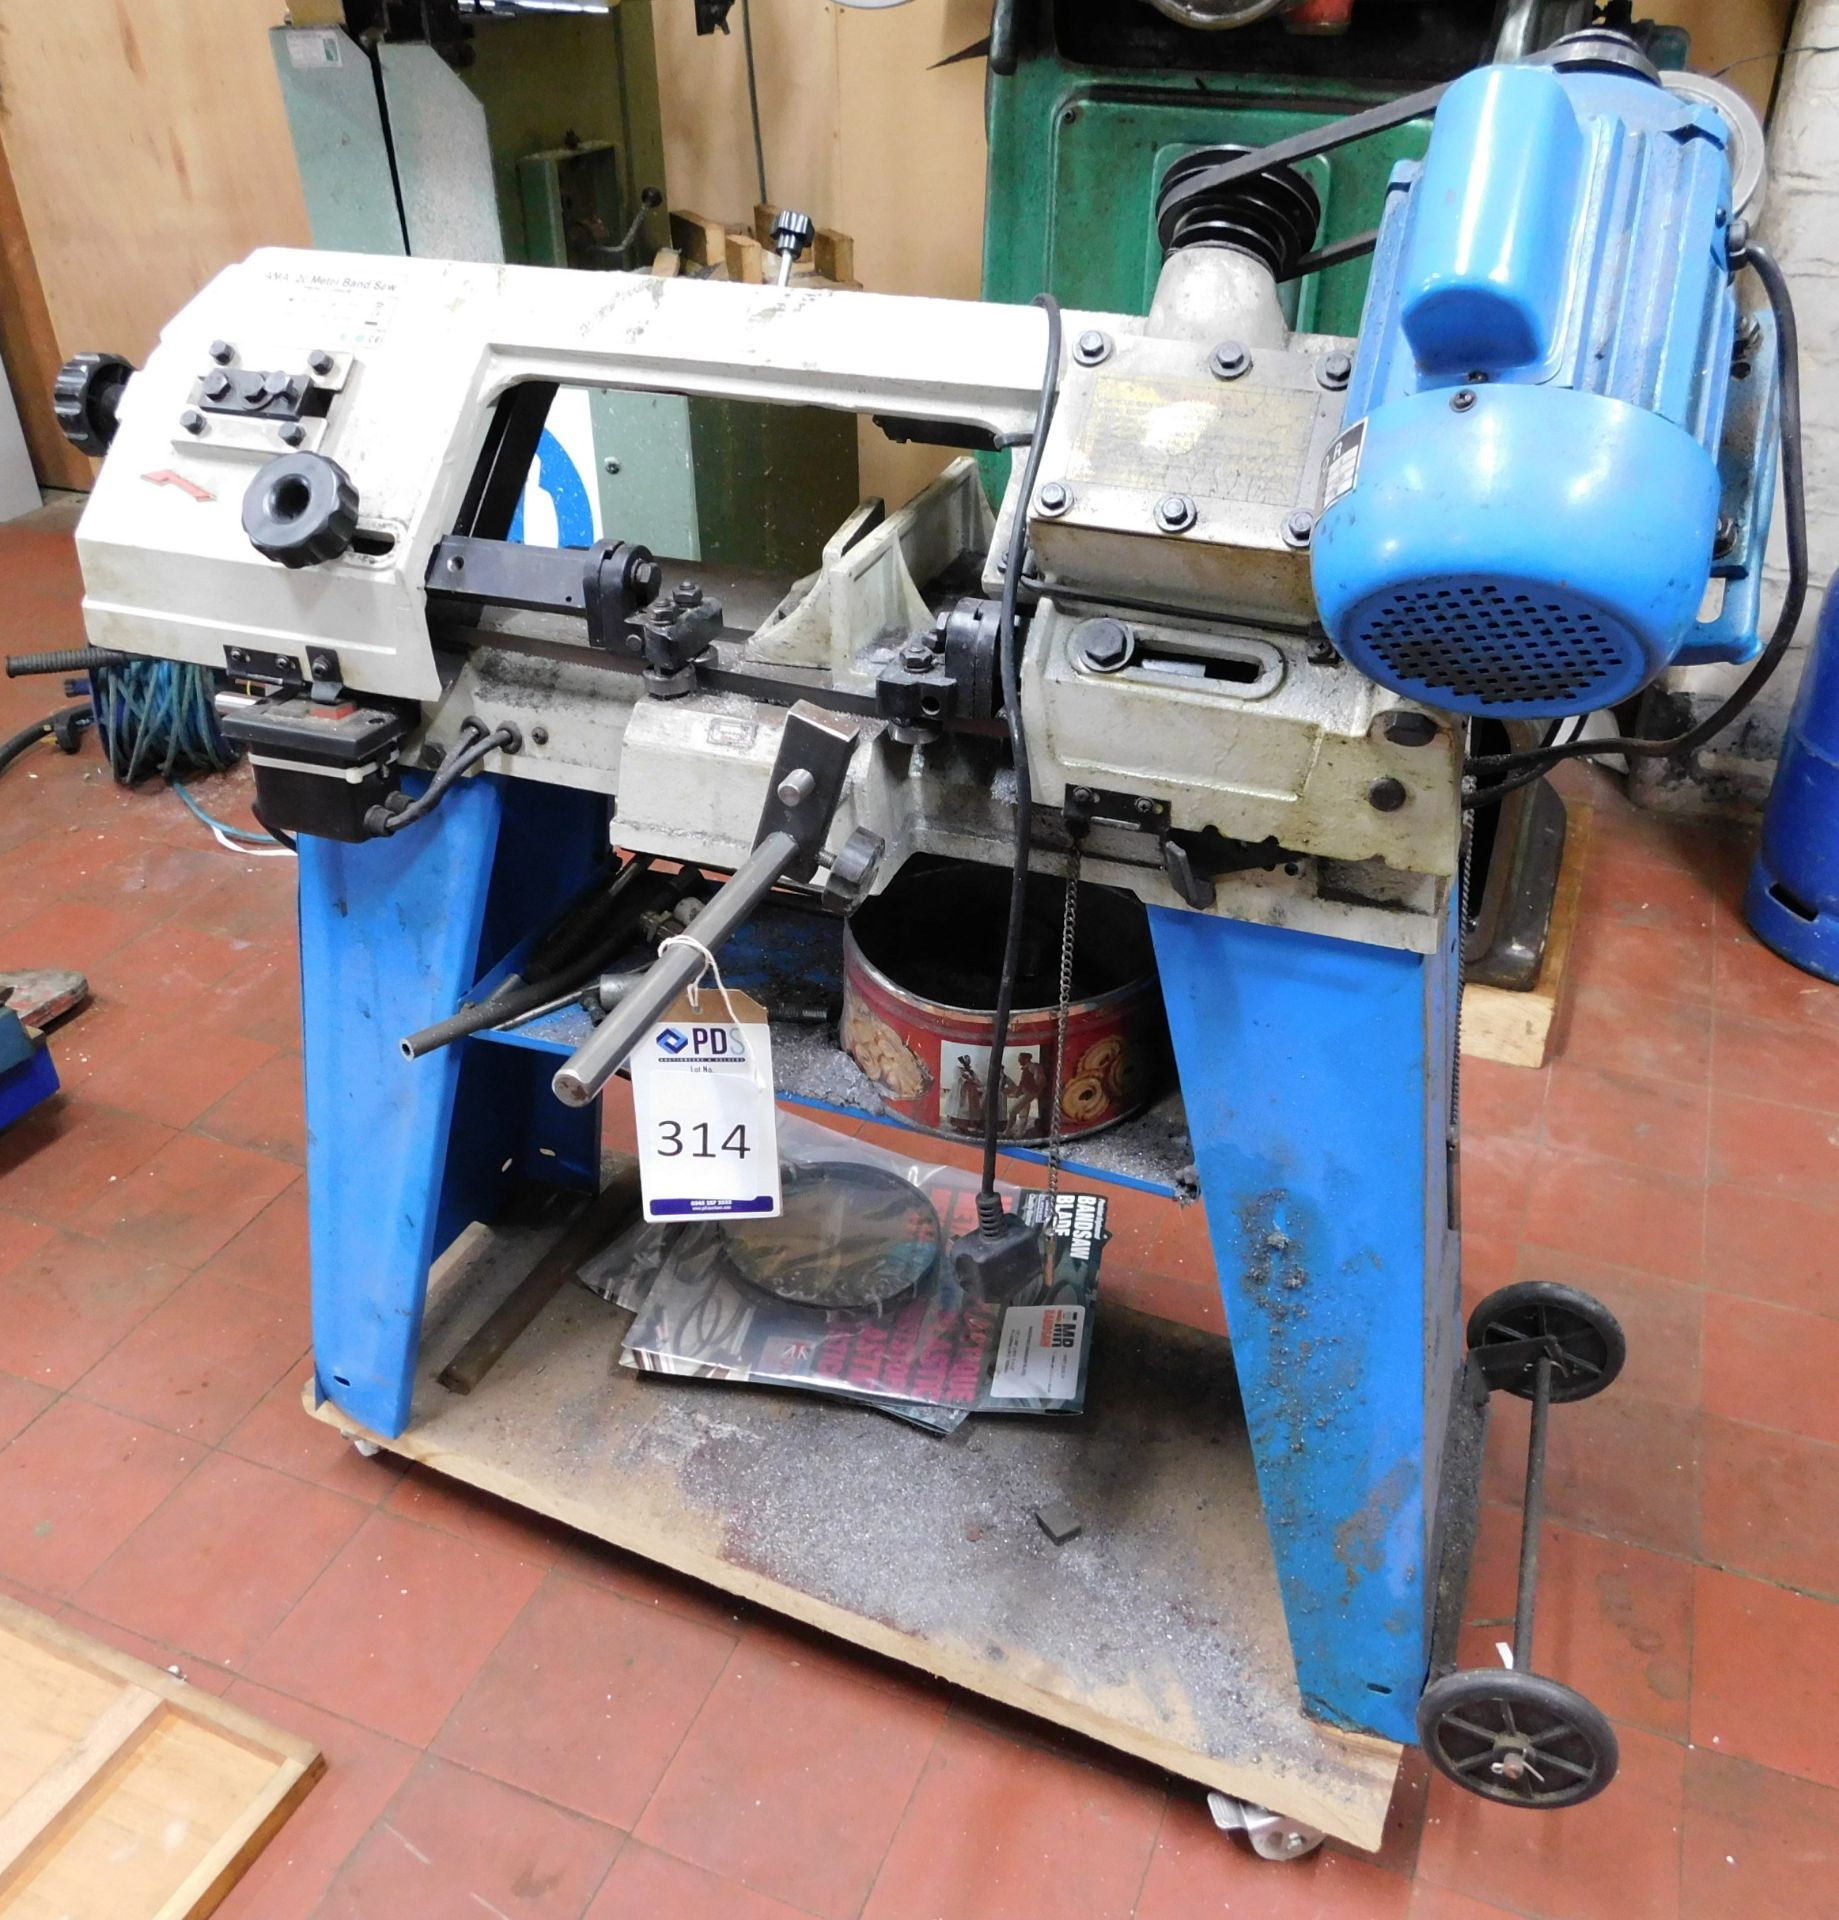 AMA120 Metal Horizontal Bandsaw (Location: Bolton. Please Refer to General Notes)